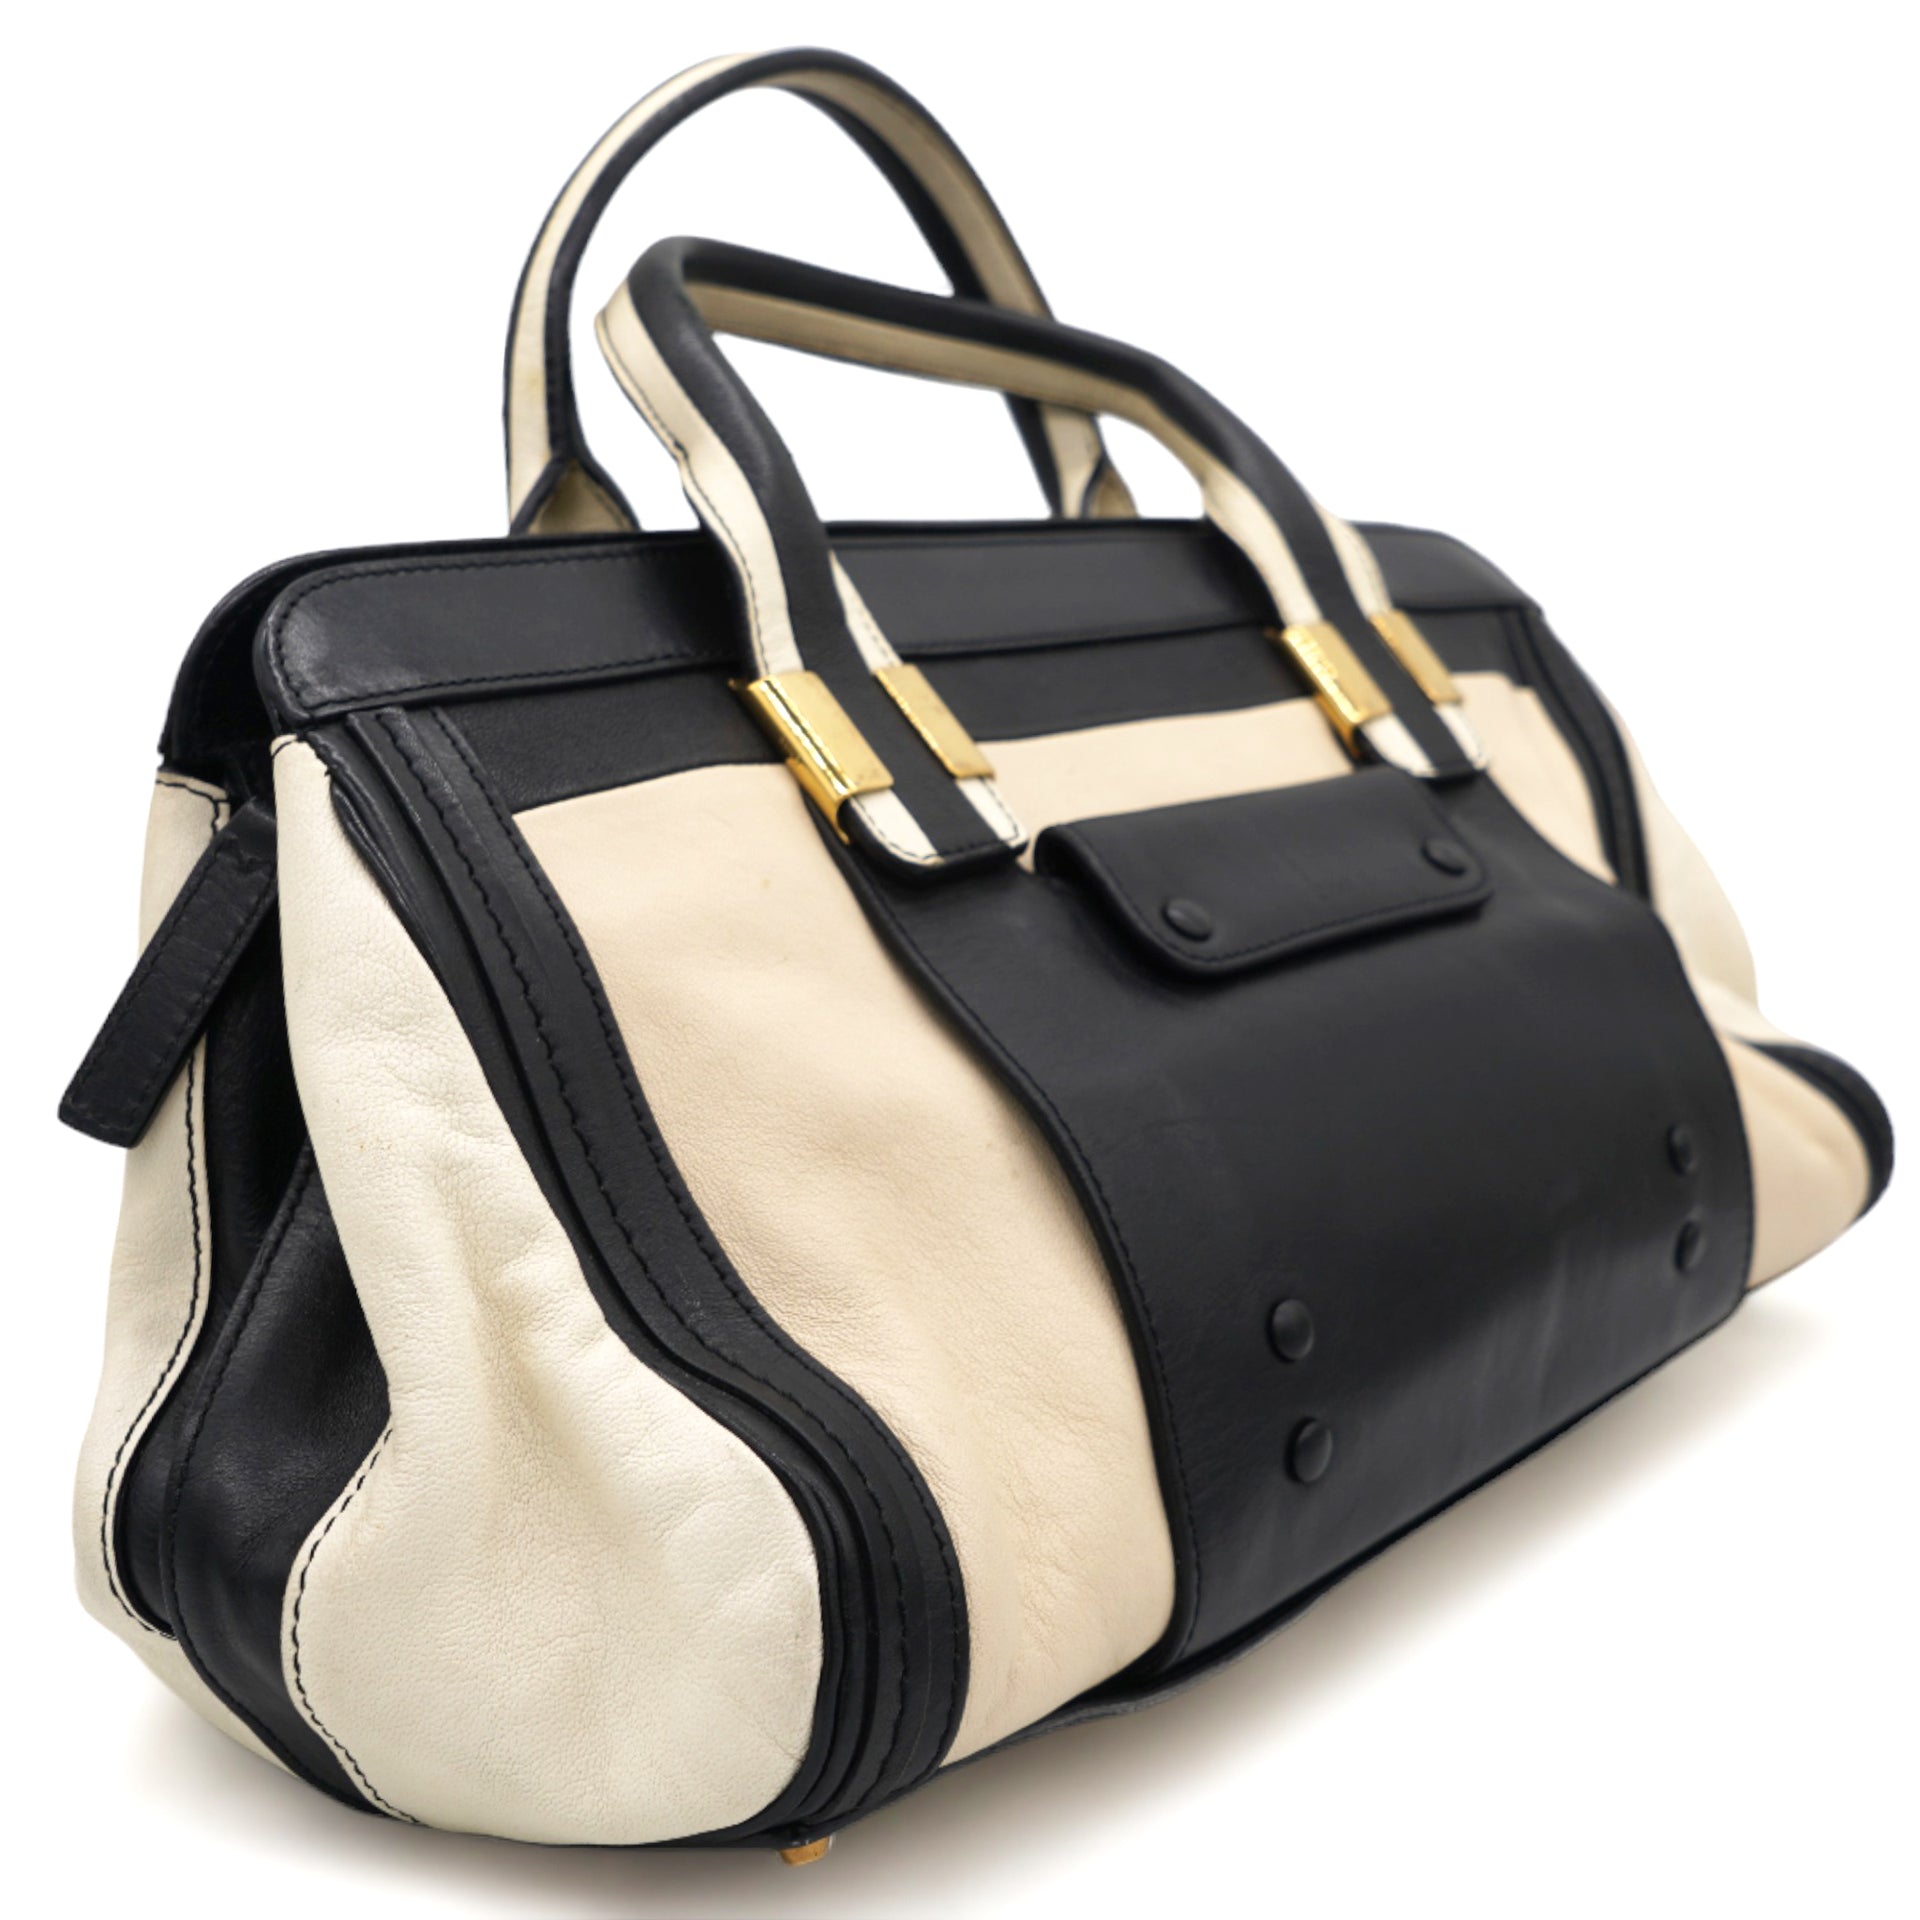 Alice Black and White Top Handle Bag